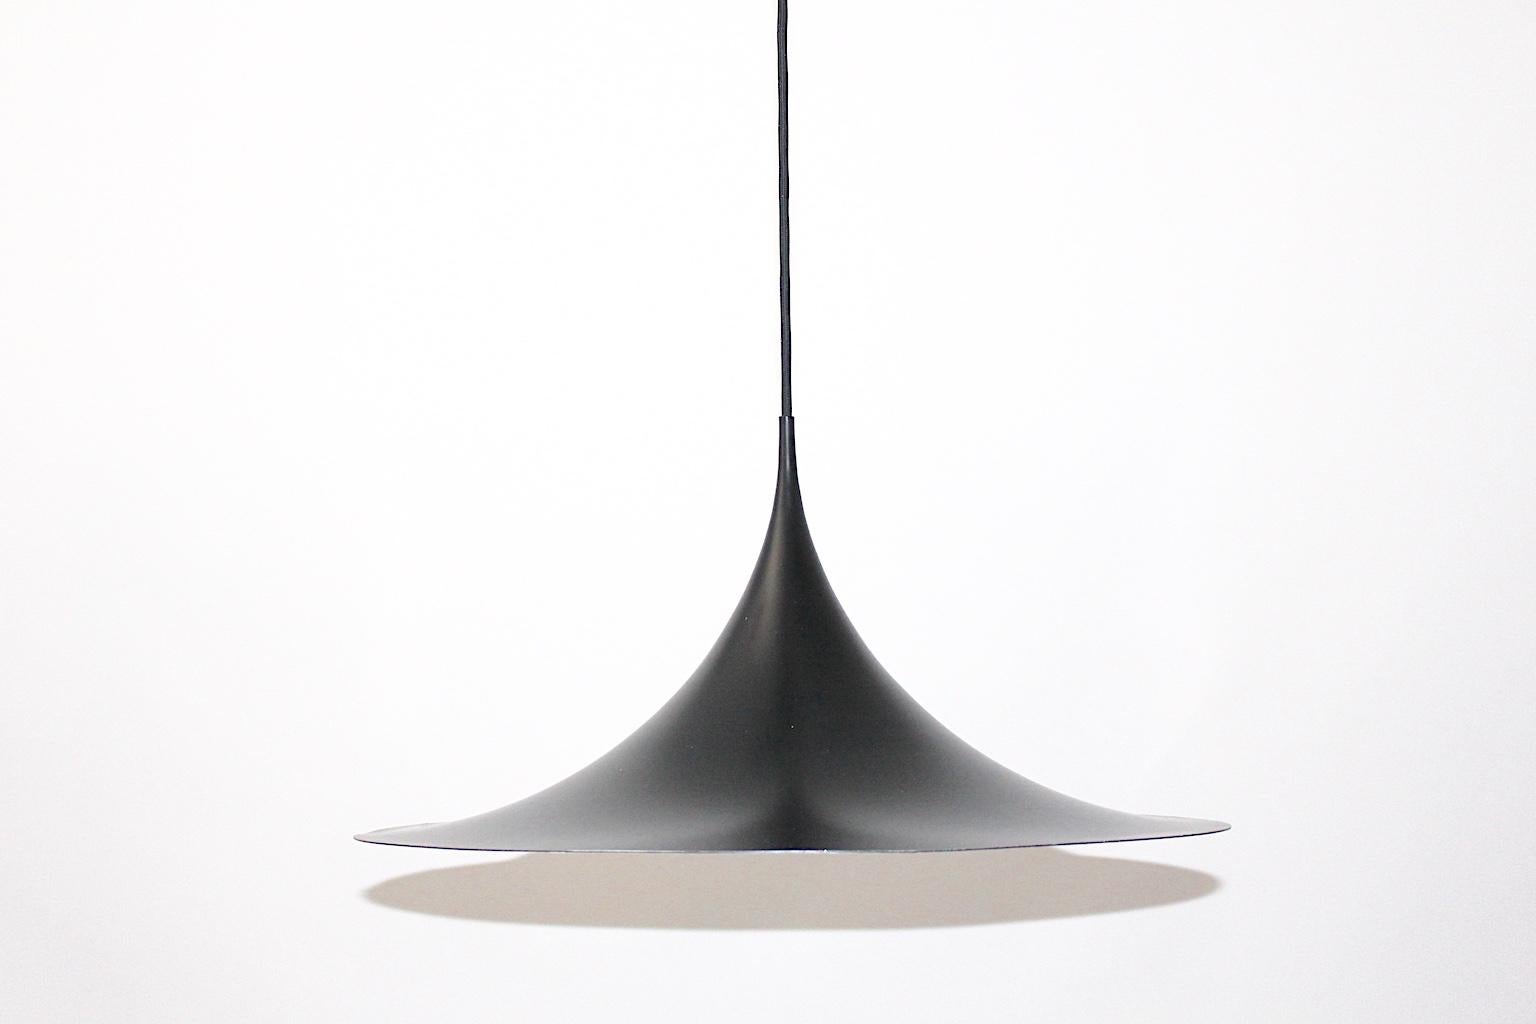 This vintage hanging light / pendant / chandelier was designed by Claus Bonderup and Thorsten Thorup, 1967 and produced by Fog & Mørup, Aalestrup, Denmark.
The iconic enameled white and black metal shade is shaped like a trumpet and shows one E 27